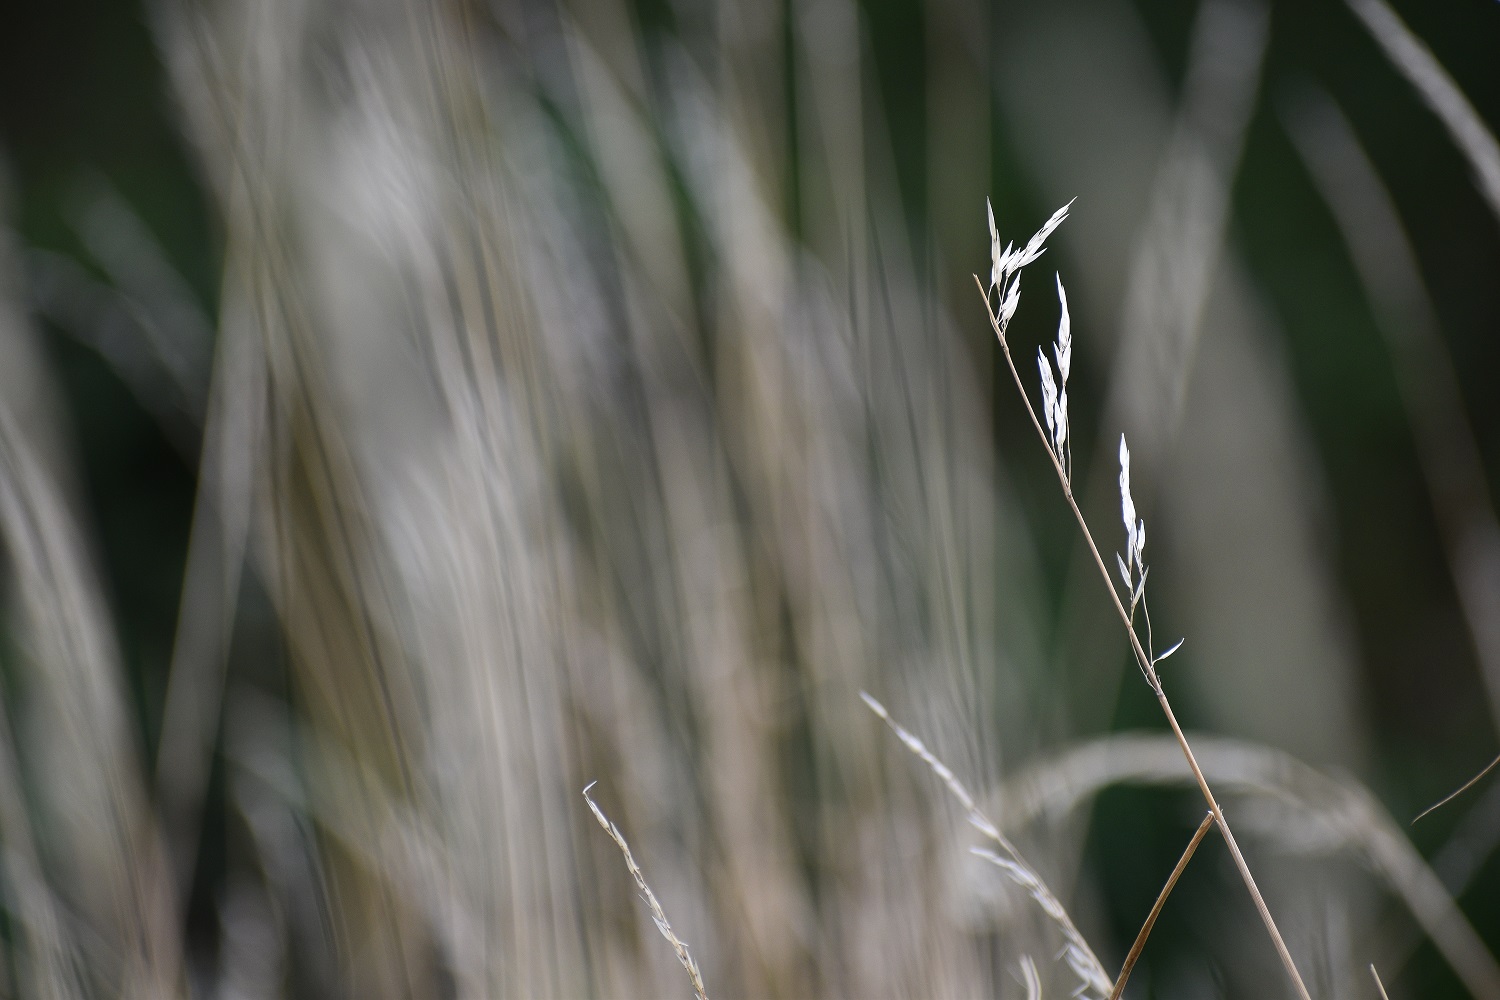 A single light brown grass stalk with the background of other grass out of focus behind